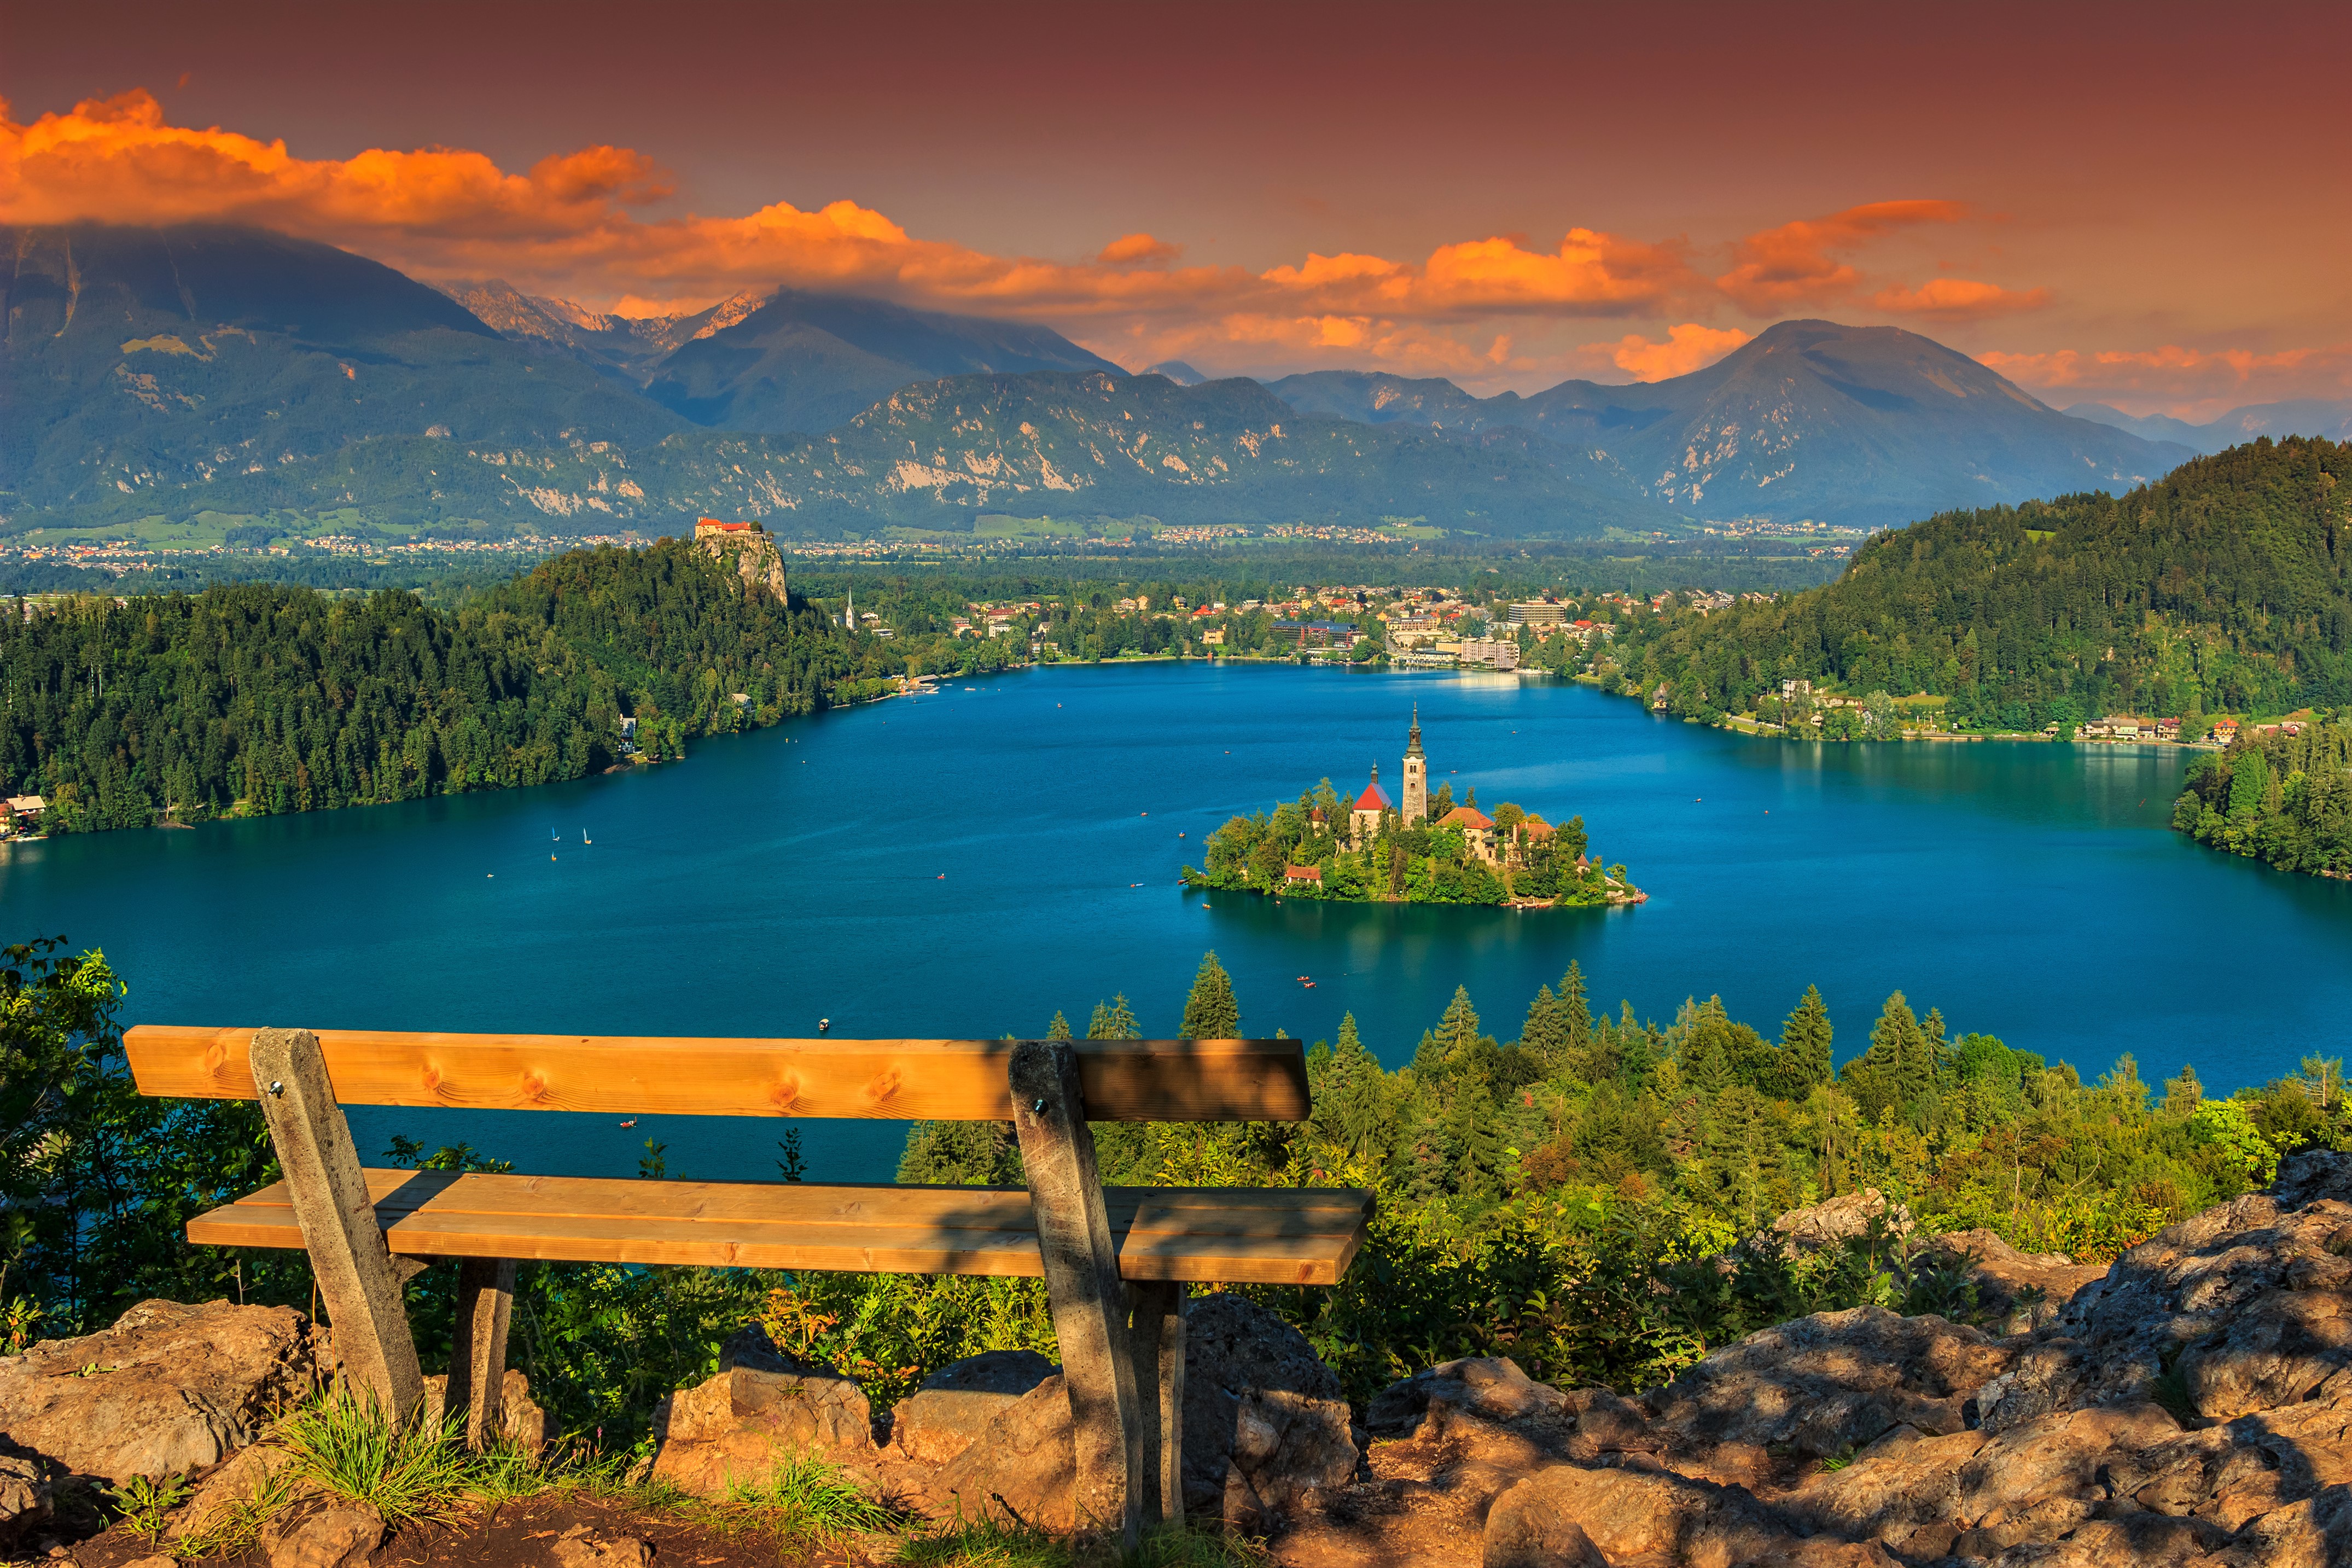 religious, assumption of mary church, bench, earth, island, lake bled, lake, churches